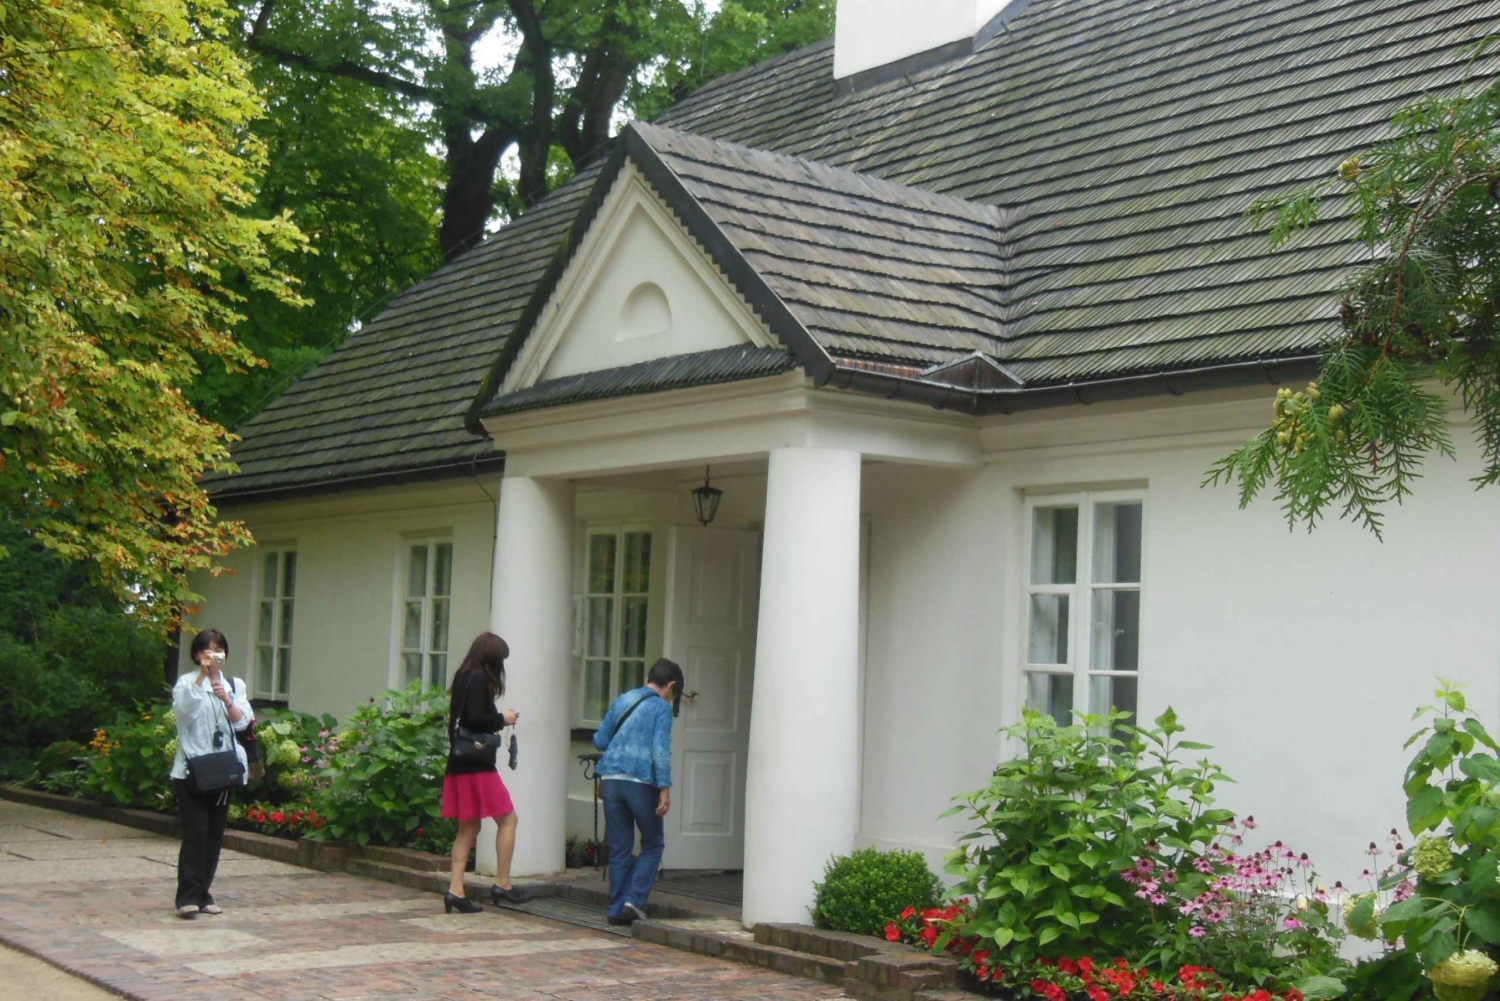 Warsaw: Day Trip to Mazovia Province and Chopin's Birthplace